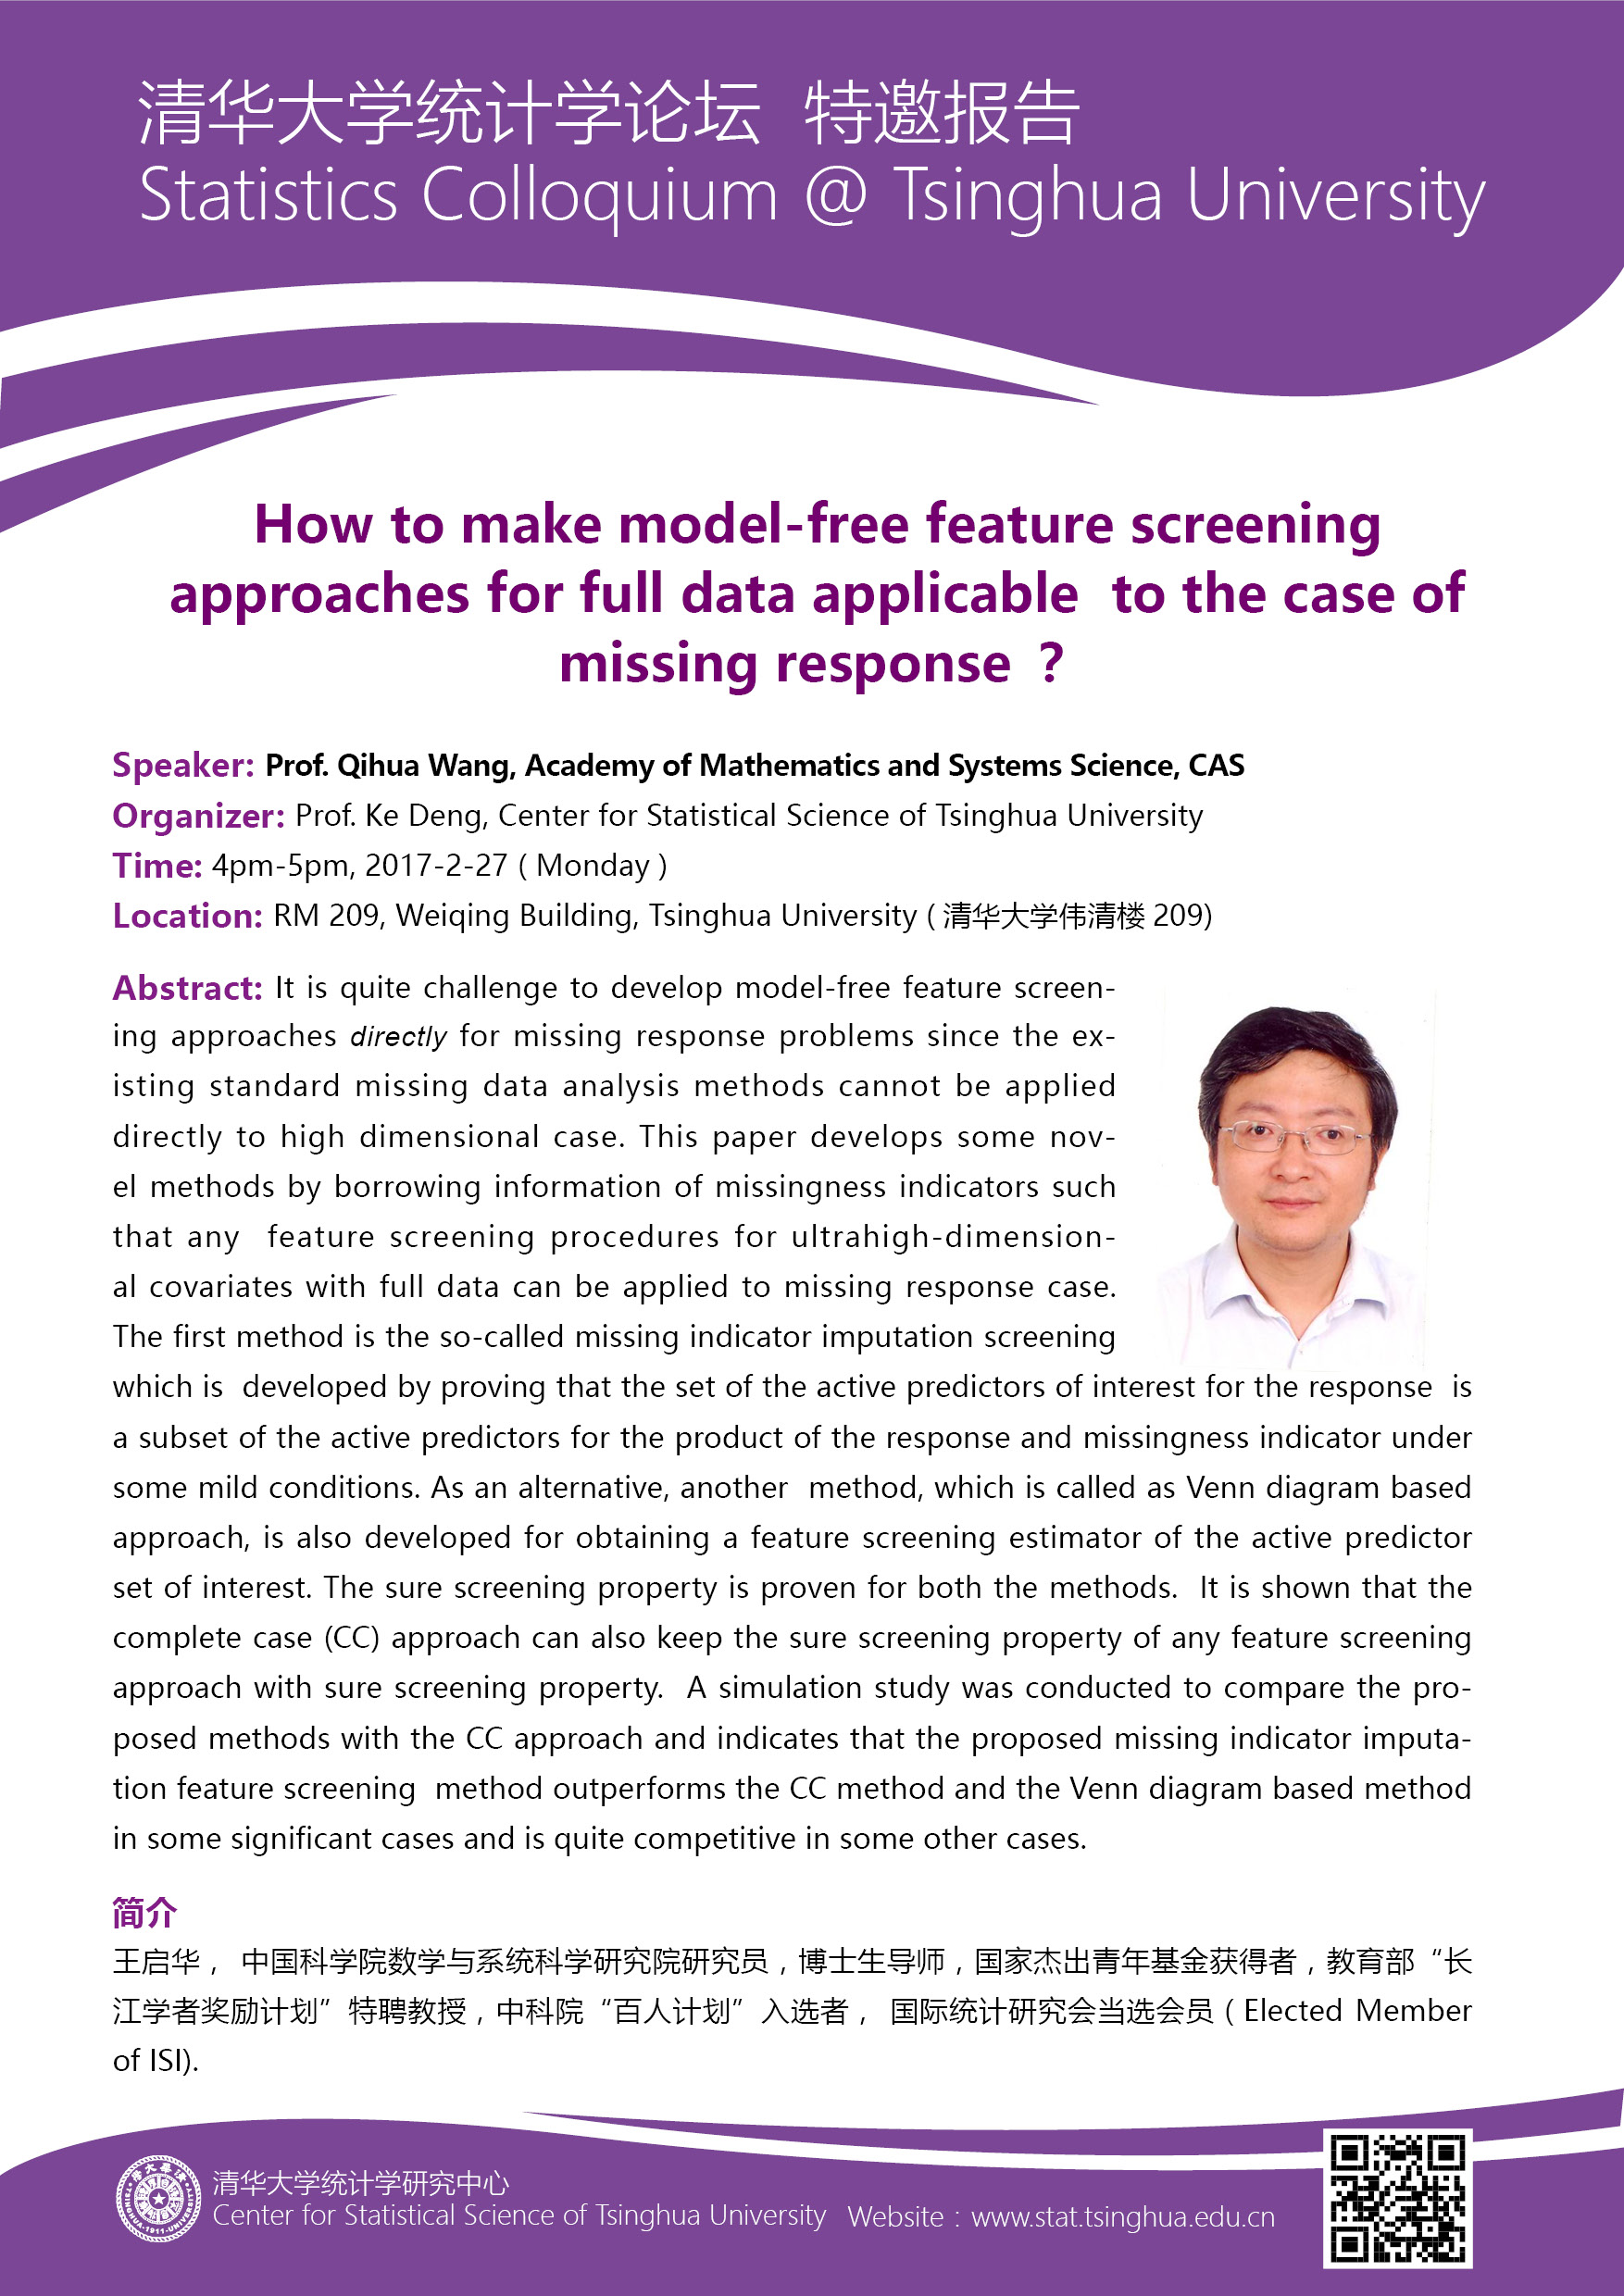 How to Make Model-free Feature Screening Approaches for Full Data Applicable to the Case of Missing Response ？